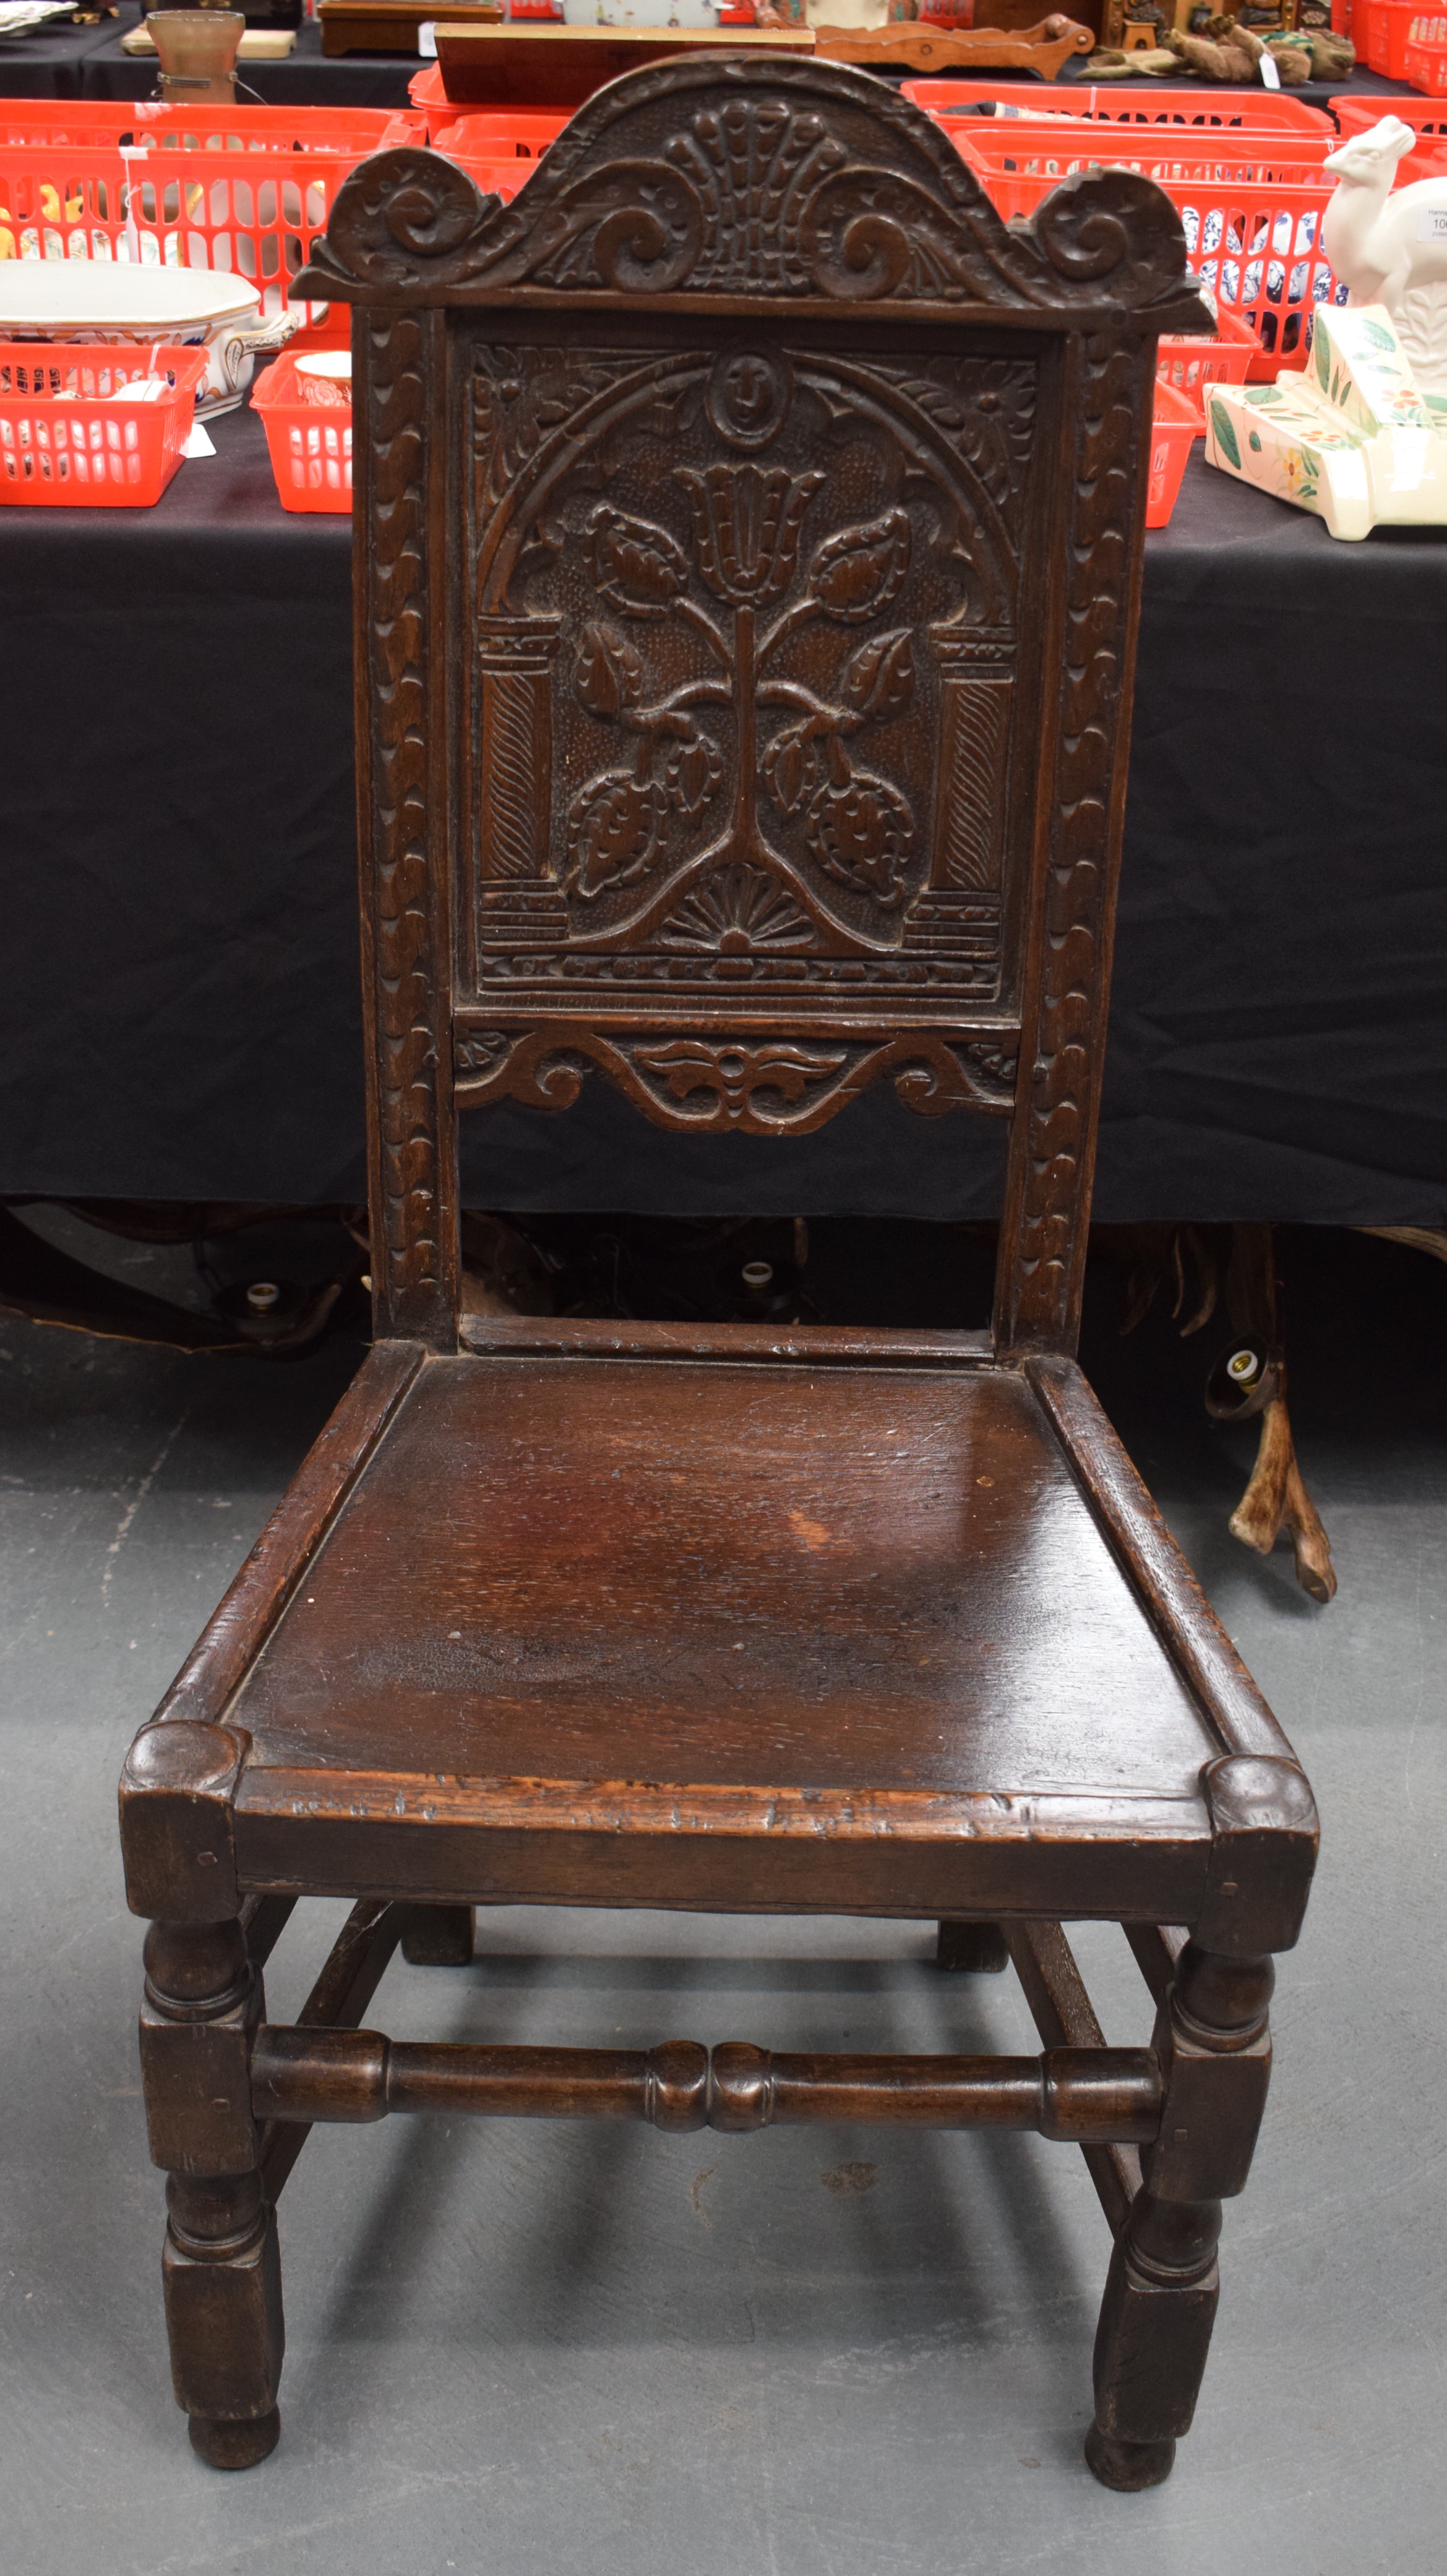 A 17TH CENTURY OAK DINING CHAIR with Tudor style floral back splat. 104 cm x 48 cm.